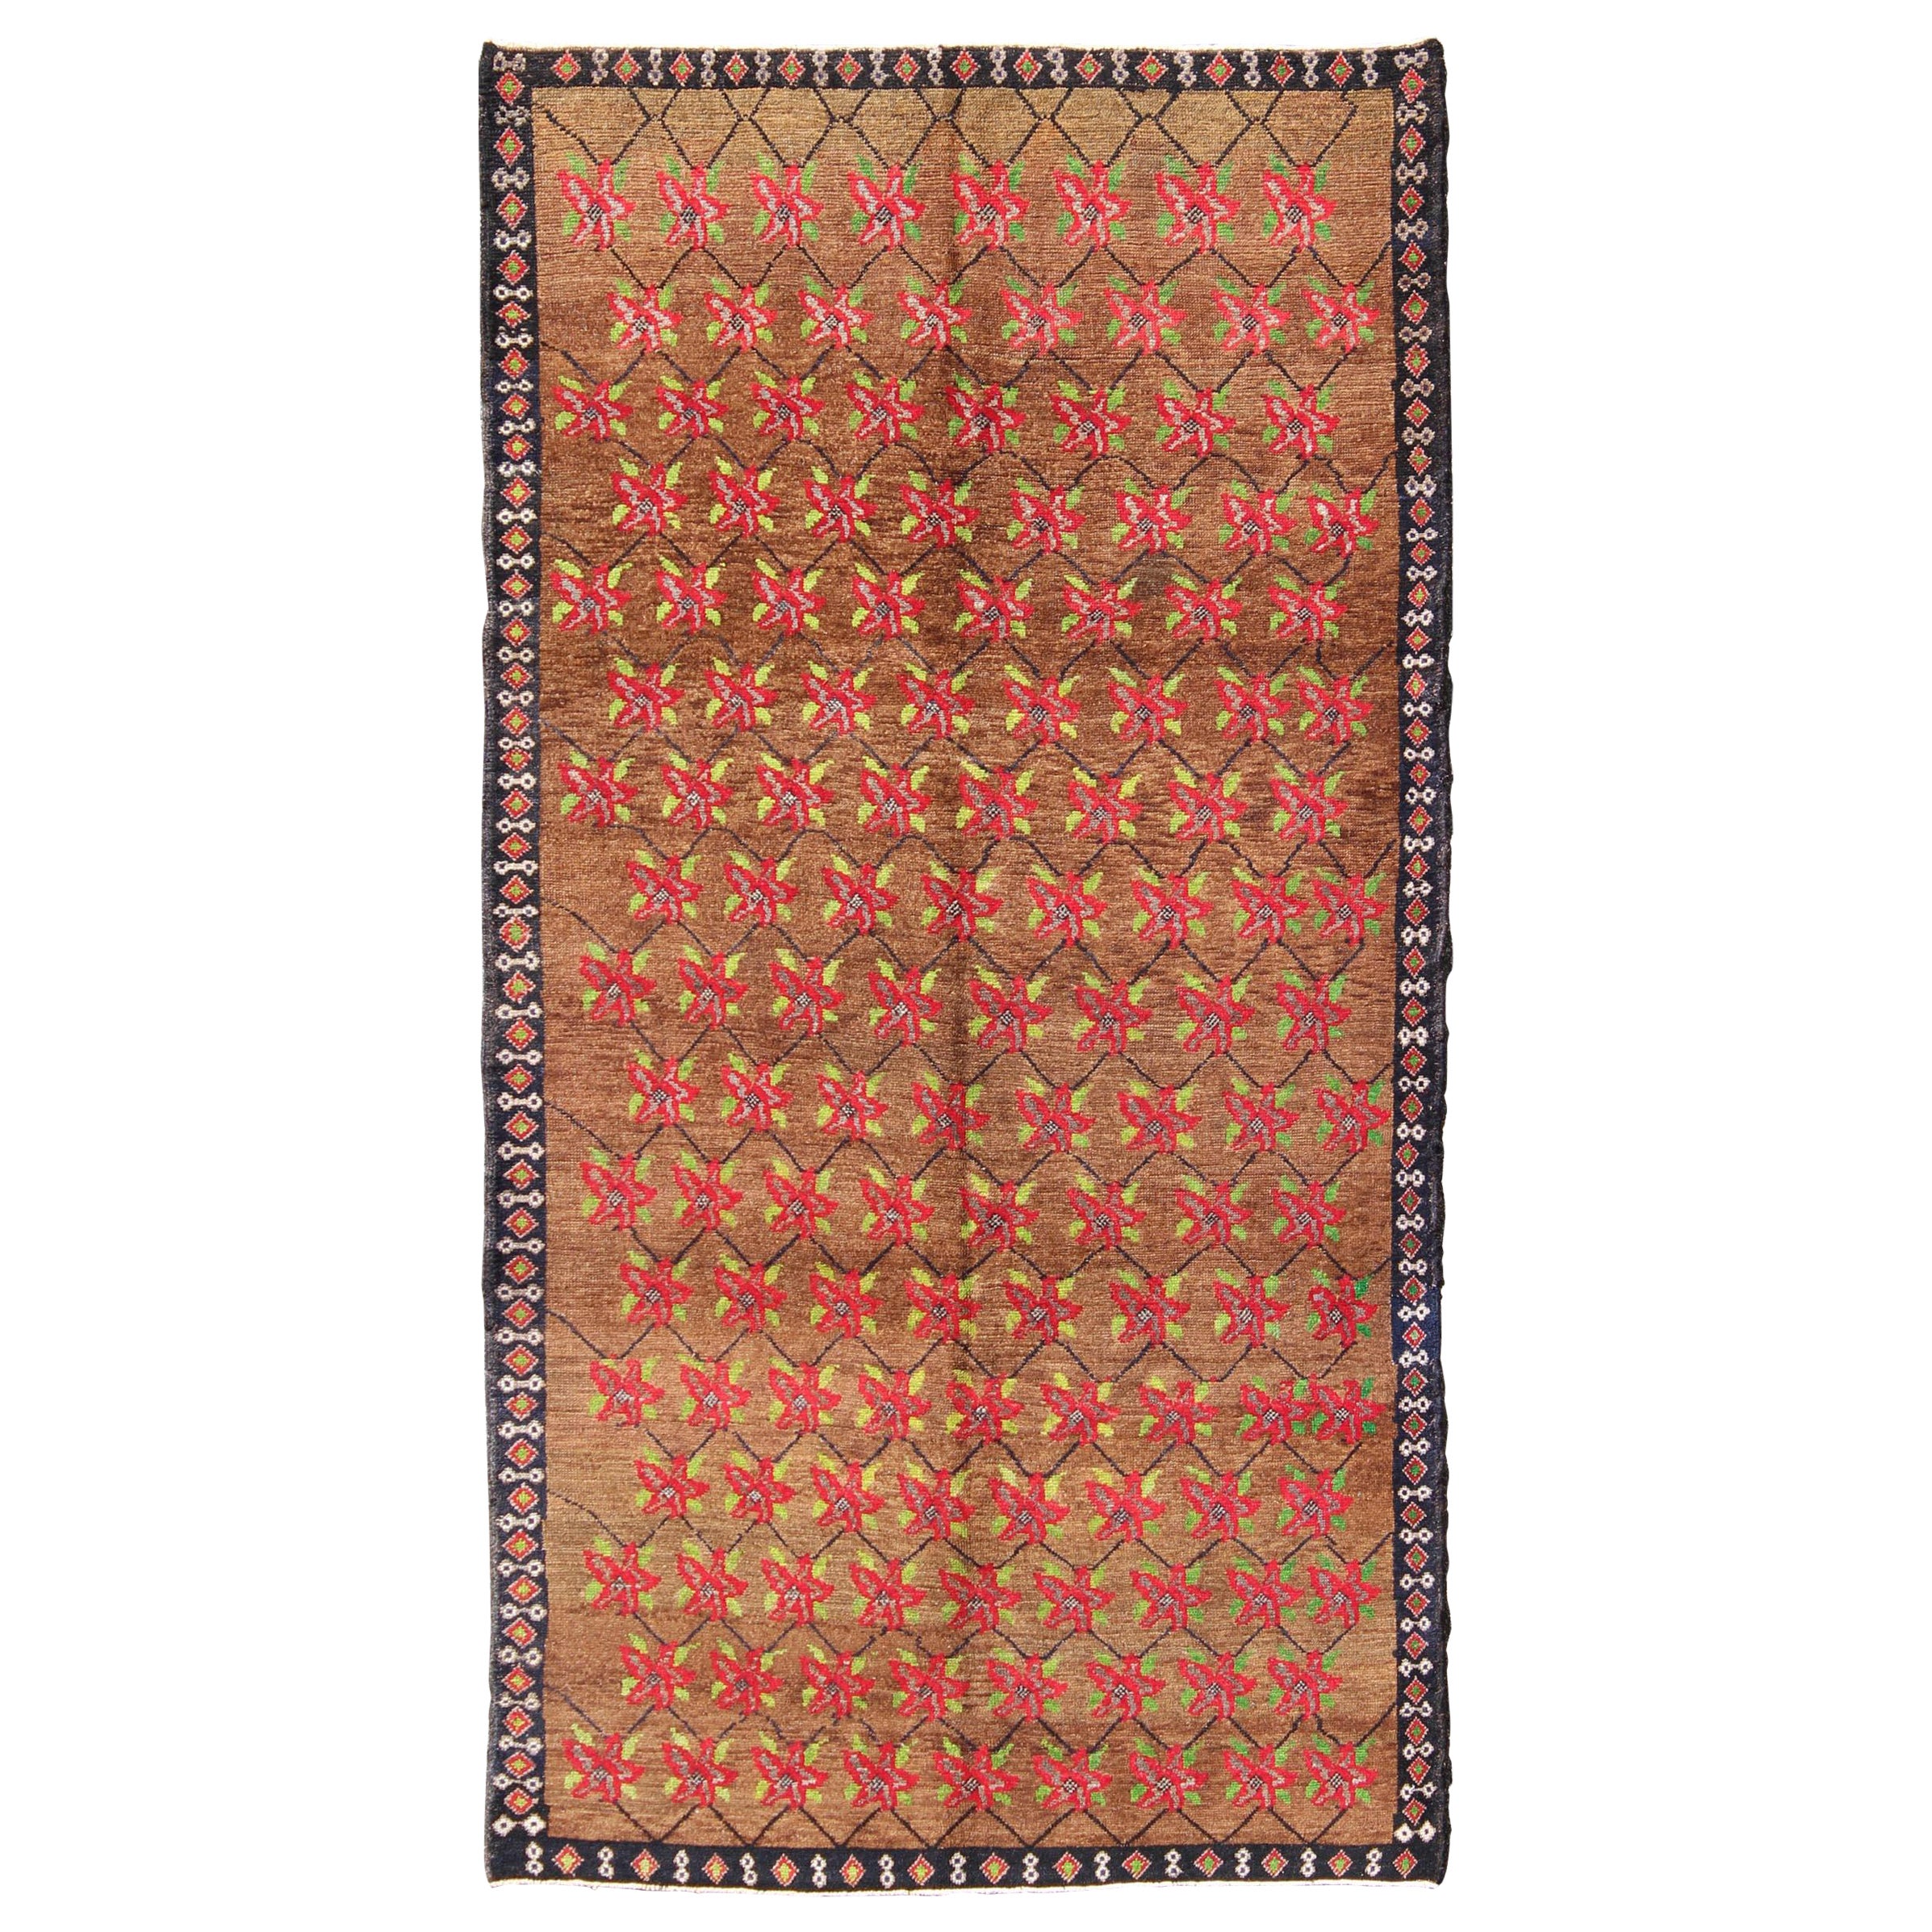 Vintage Turkish Tulu Rug with a Modern Design with Poinsettia Flower Design